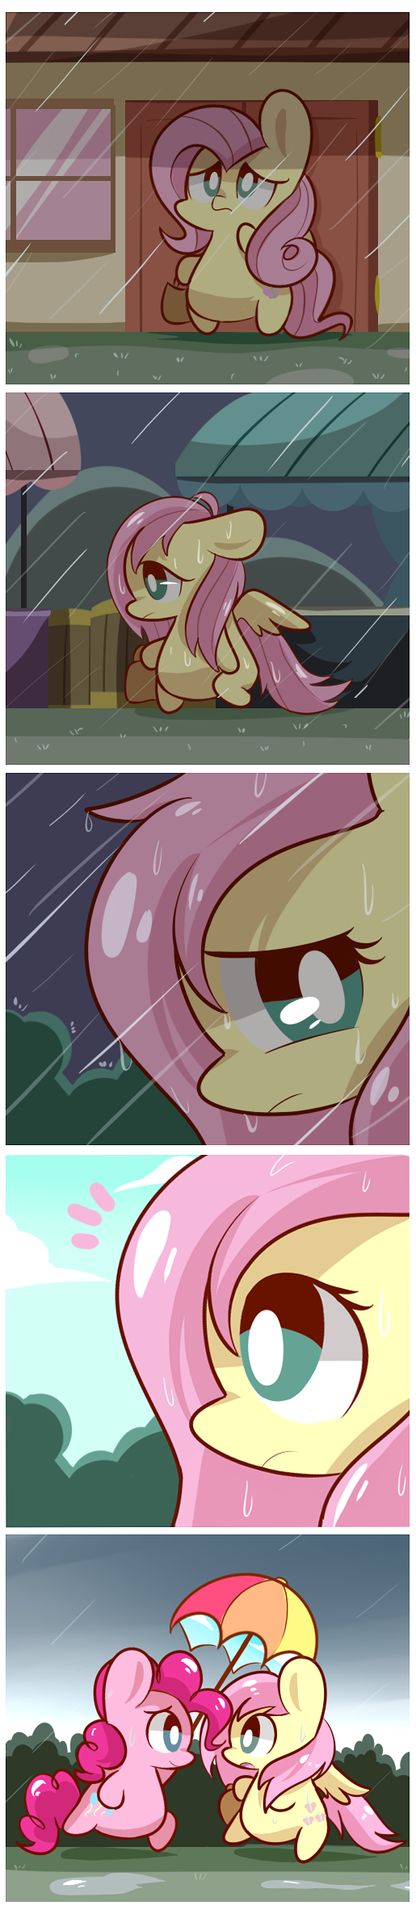 rainy_day_by_lloserlife-d6lw0bt.png